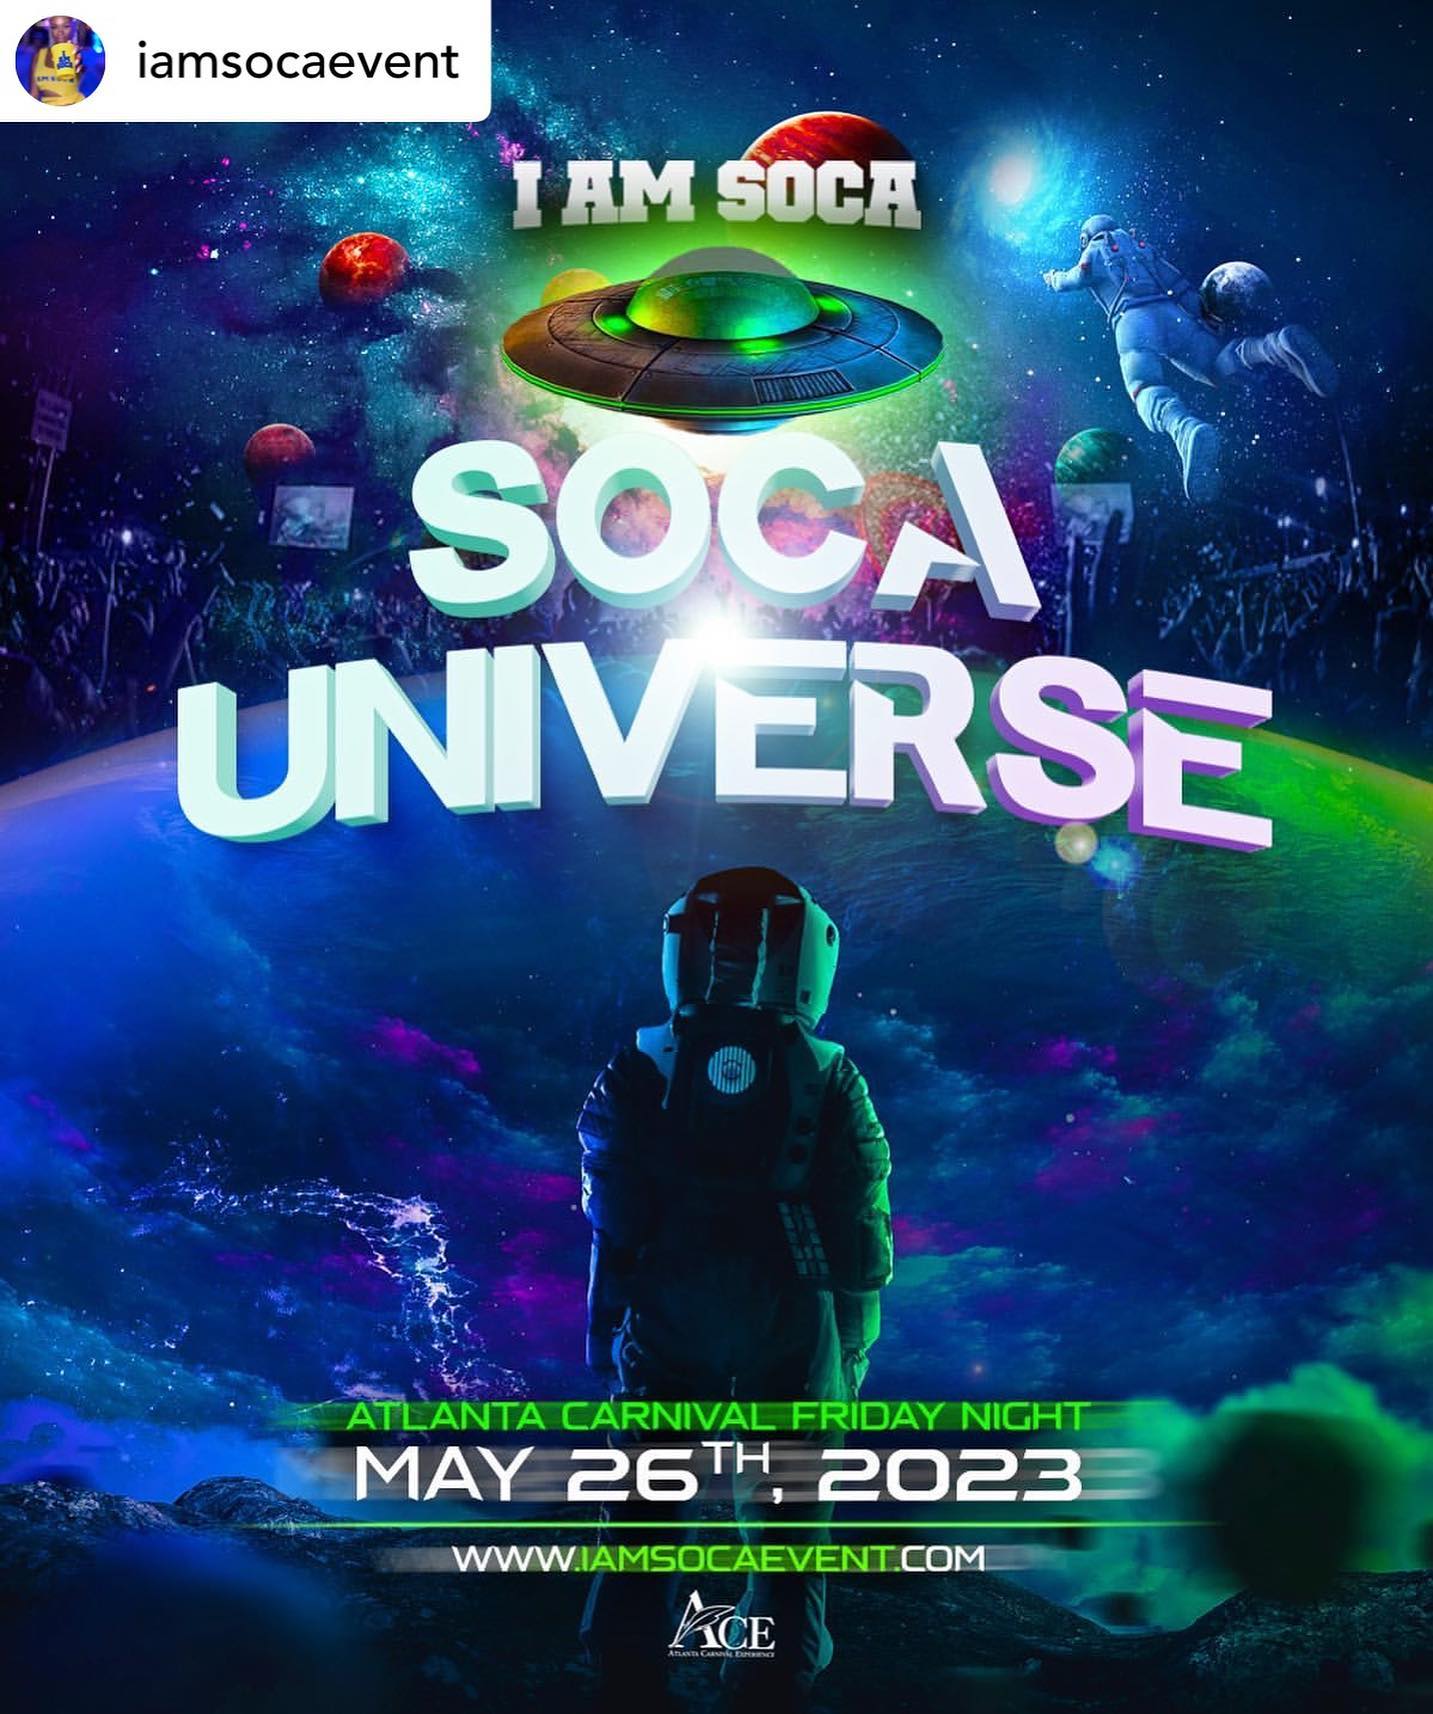 ATLANTA  THE LONG LIVE SOCA TOUR IS COMING YOU WAY… 

We Have An Astronomical Experience Planned…

Welcome To The 🛸SOCA UNIVERSE🛸

Friday 26th May, 2023

Starring Some Of Your Favorite Local & International Soca DJs.

Dress Code: Neon Colors

Tickets Available Online Via
www•IAmSocaEvent•com

Celebrate your birthday with us
Email: IAmSocaEvent@gmail.com

for Event info & More follow us on Facebook & Instagram: @IAmSocaEvent